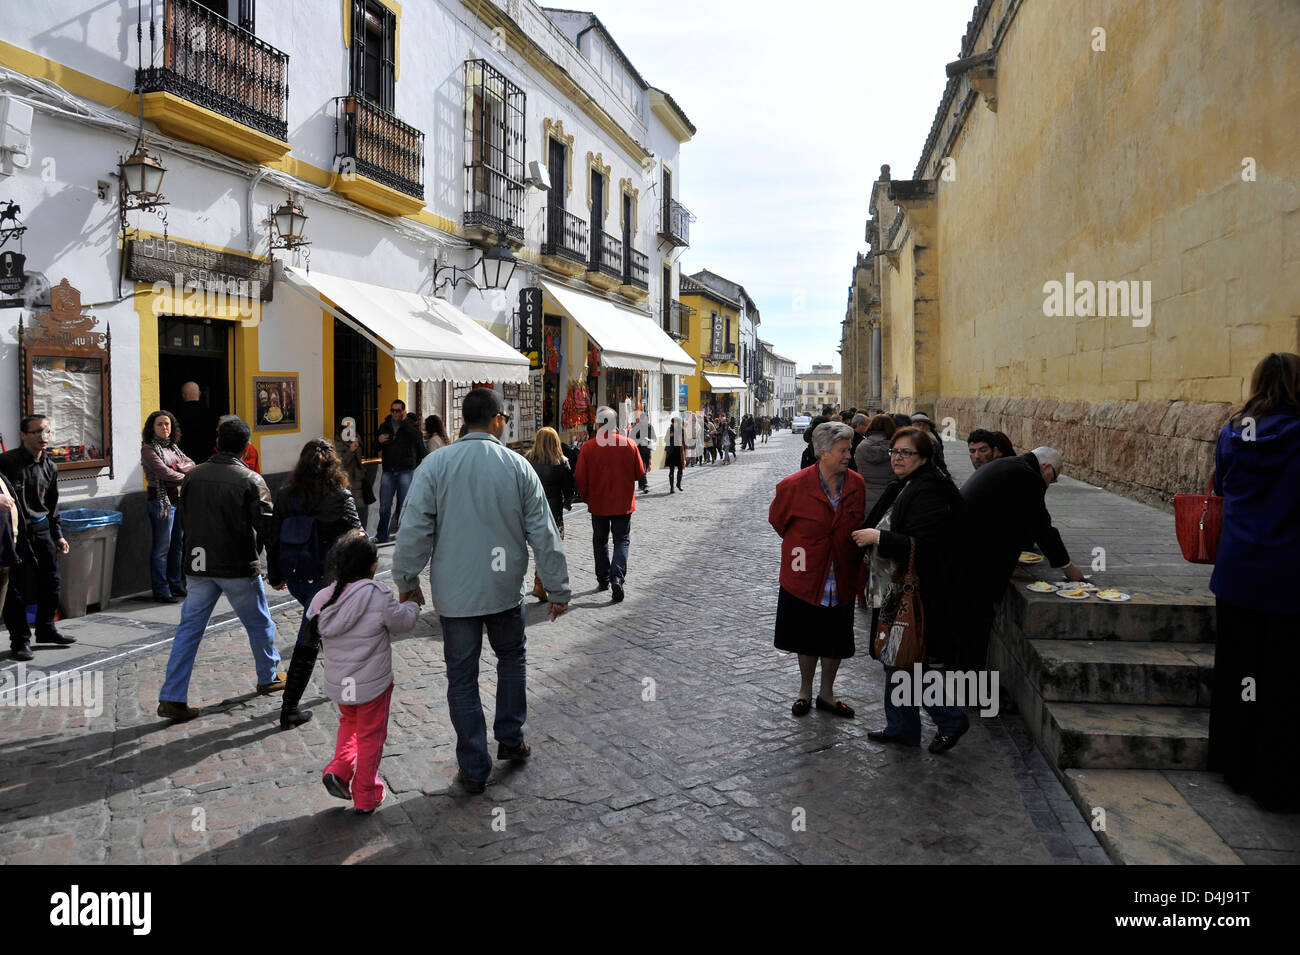 Mid-Day on a Sunday people crowd a street outside the Mezquita Mosque-Cathedral in Cordoba, Andalusia, Spain, and consume drinks Stock Photo